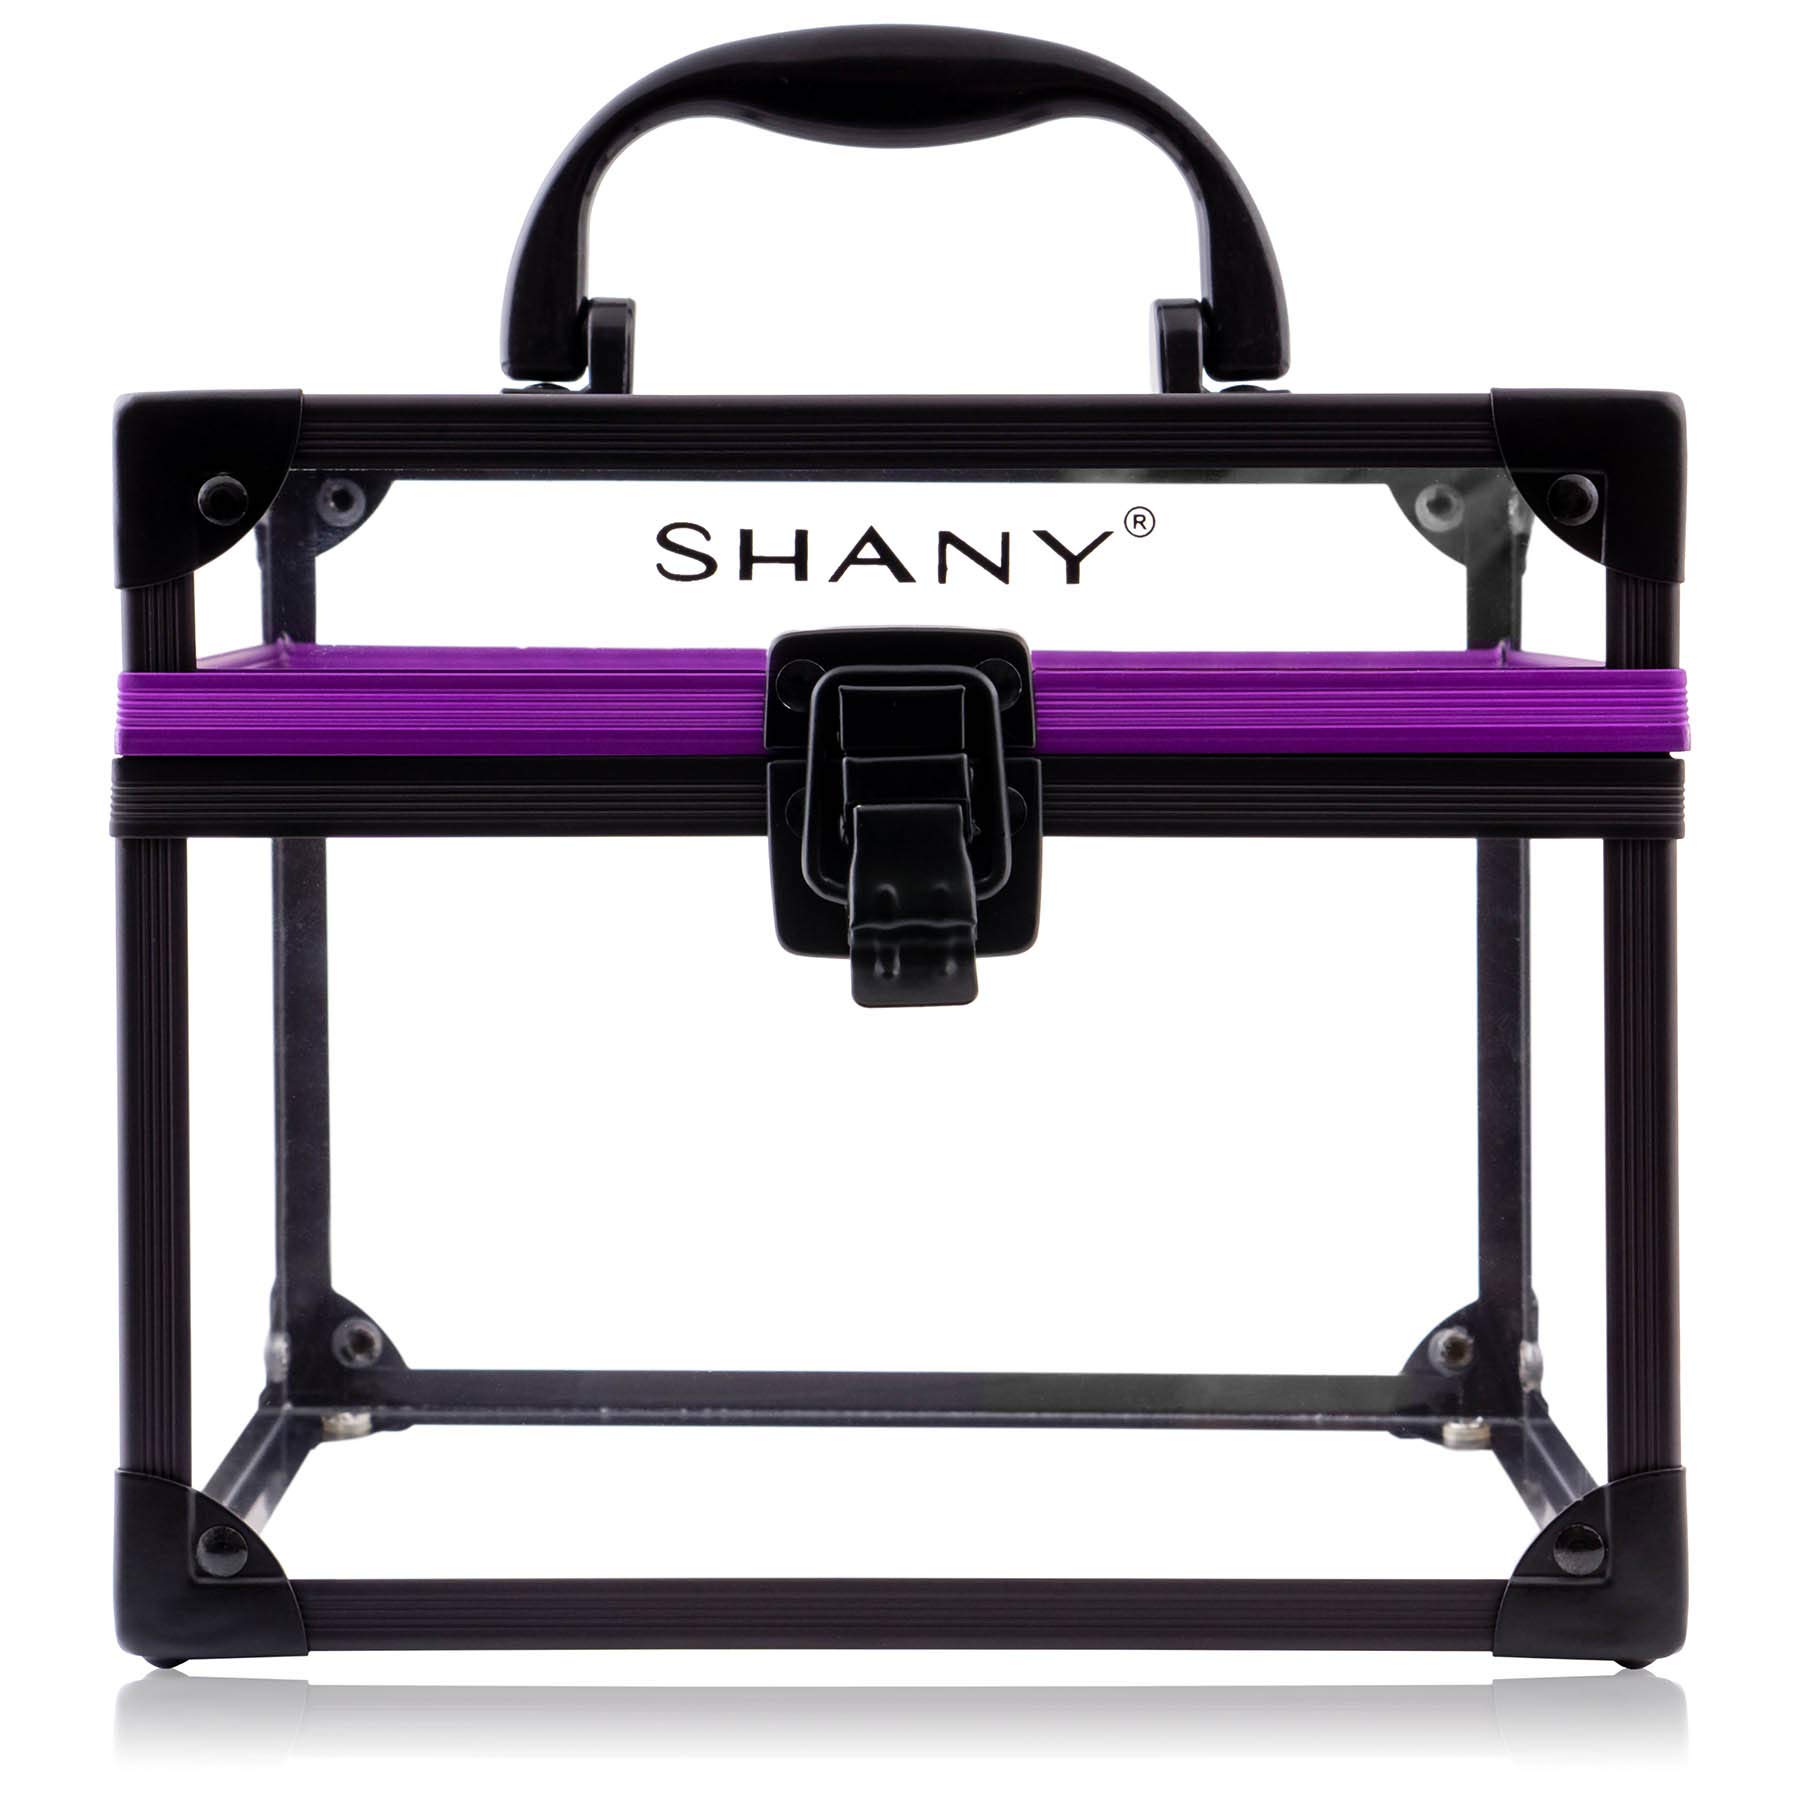 SHANY Clear Cosmetics and Toiletry Train Case - Large-Sized Travel Makeup Organizer with Secure Closure and Black/Purple Accents